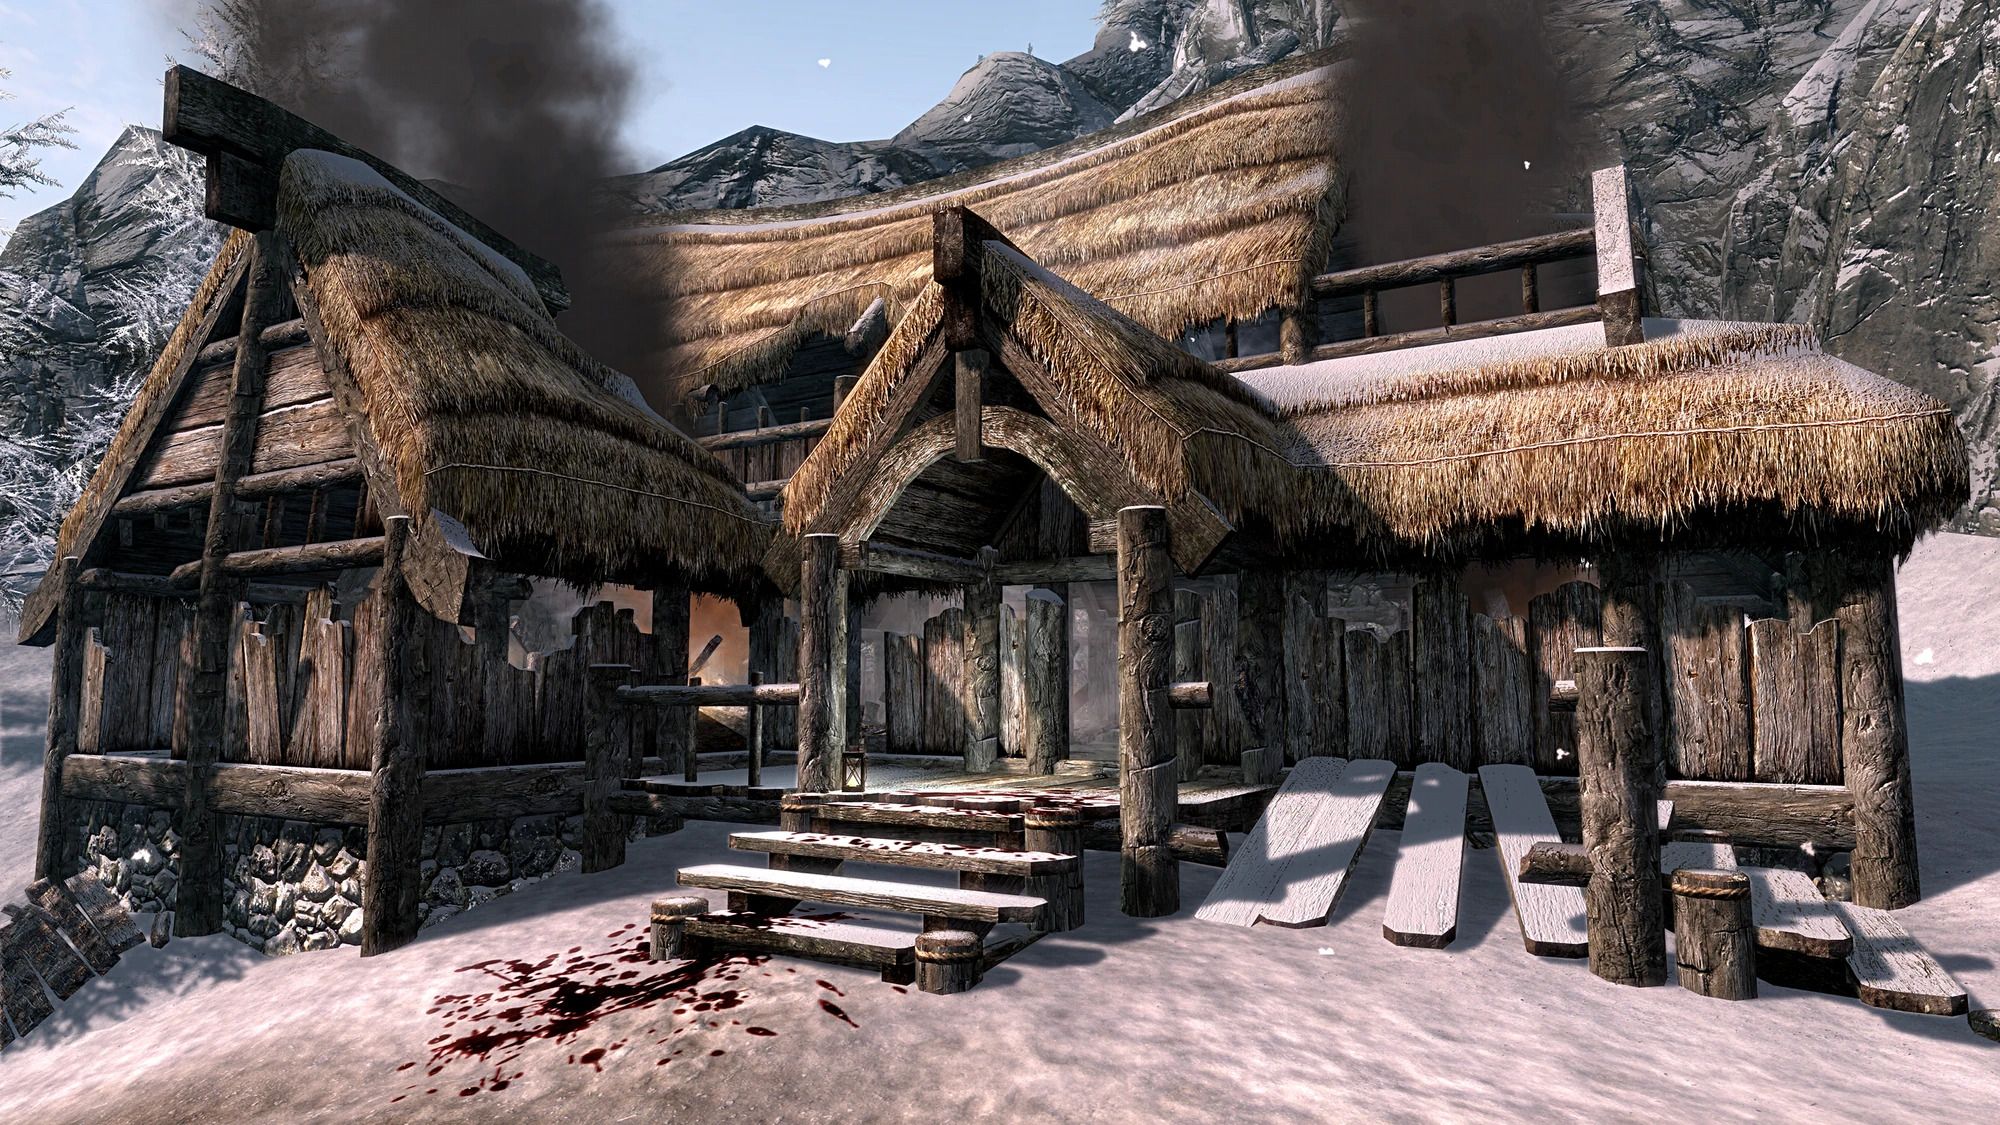 The walls of the Hall of the Vigilant in Skyrim have been wrecked and smoke leaks out of the roof.